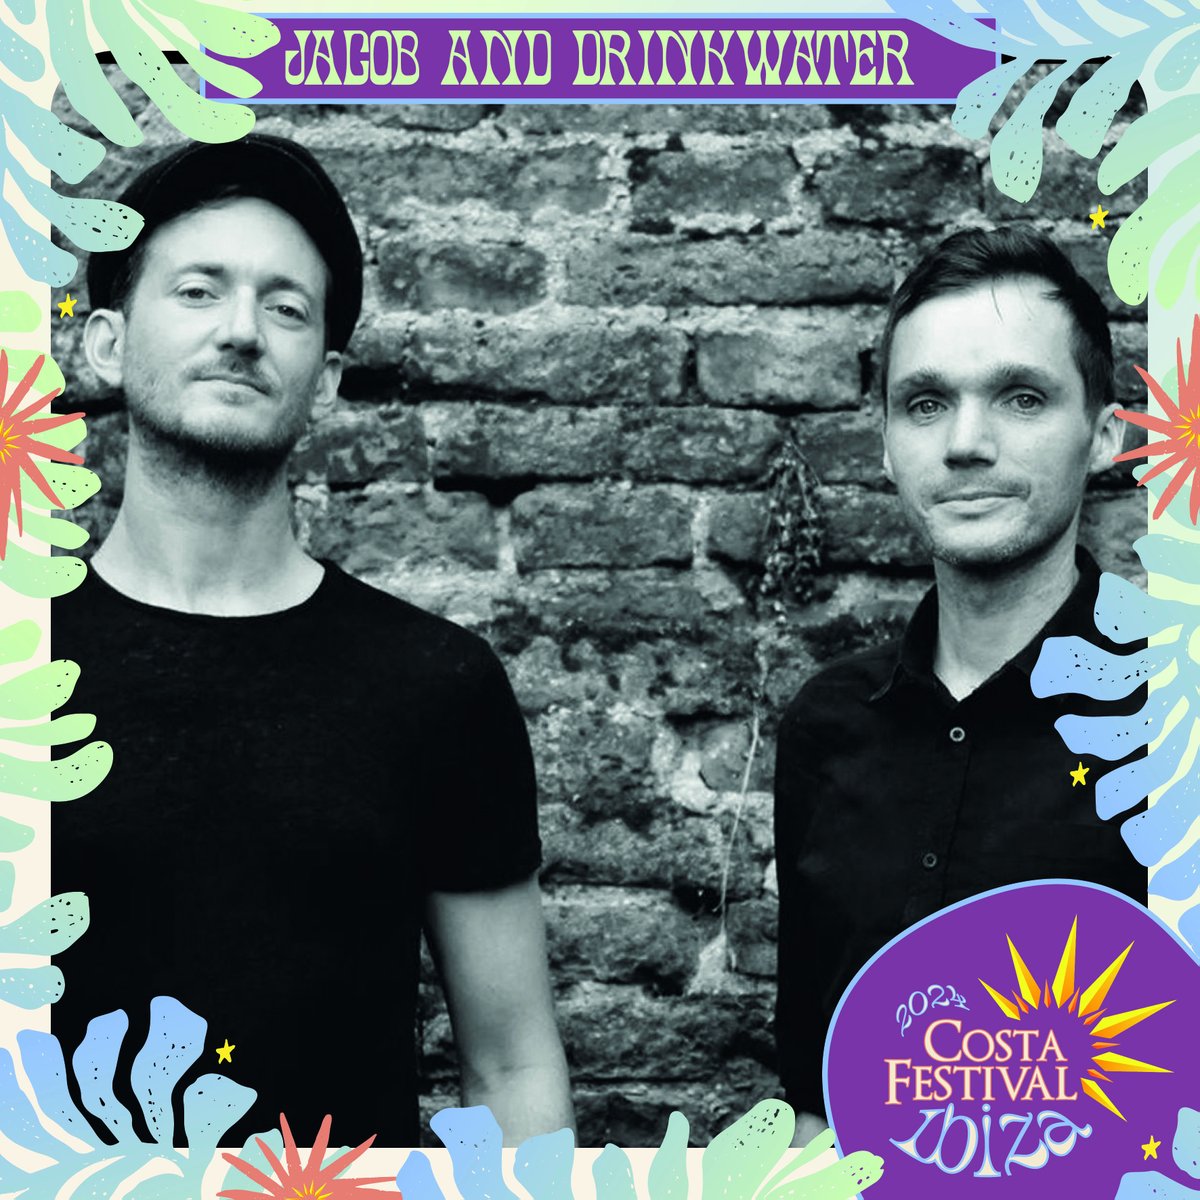 Virtuoistic duo Jacob & Drinkwater are playing at Costa Ibiza as part of their latest tour!🌟 If you want a dash of chemistry and emotionally charged playing with your folk, then this captivating and harmonic pair are for you! 🔗costafestival.co.uk/costa-festival…